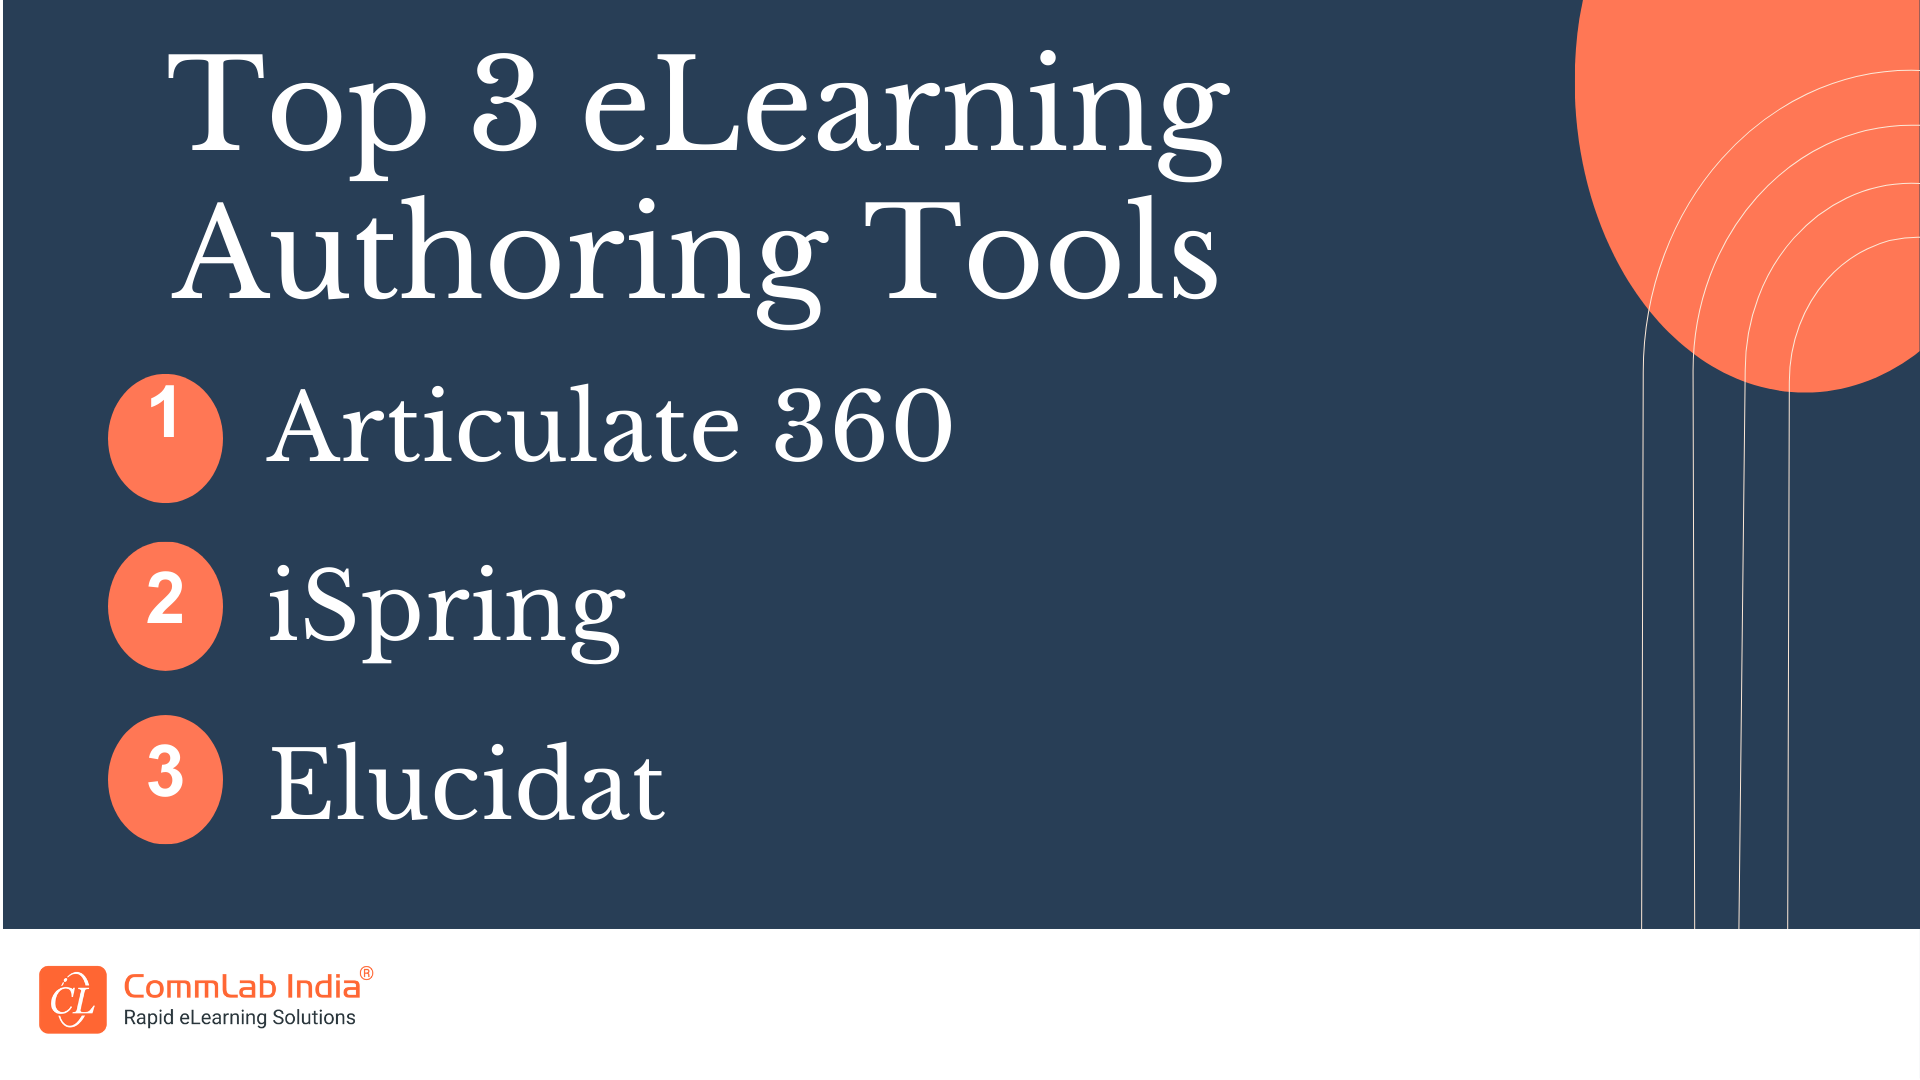 Top 3 eLearning Authoring Tools